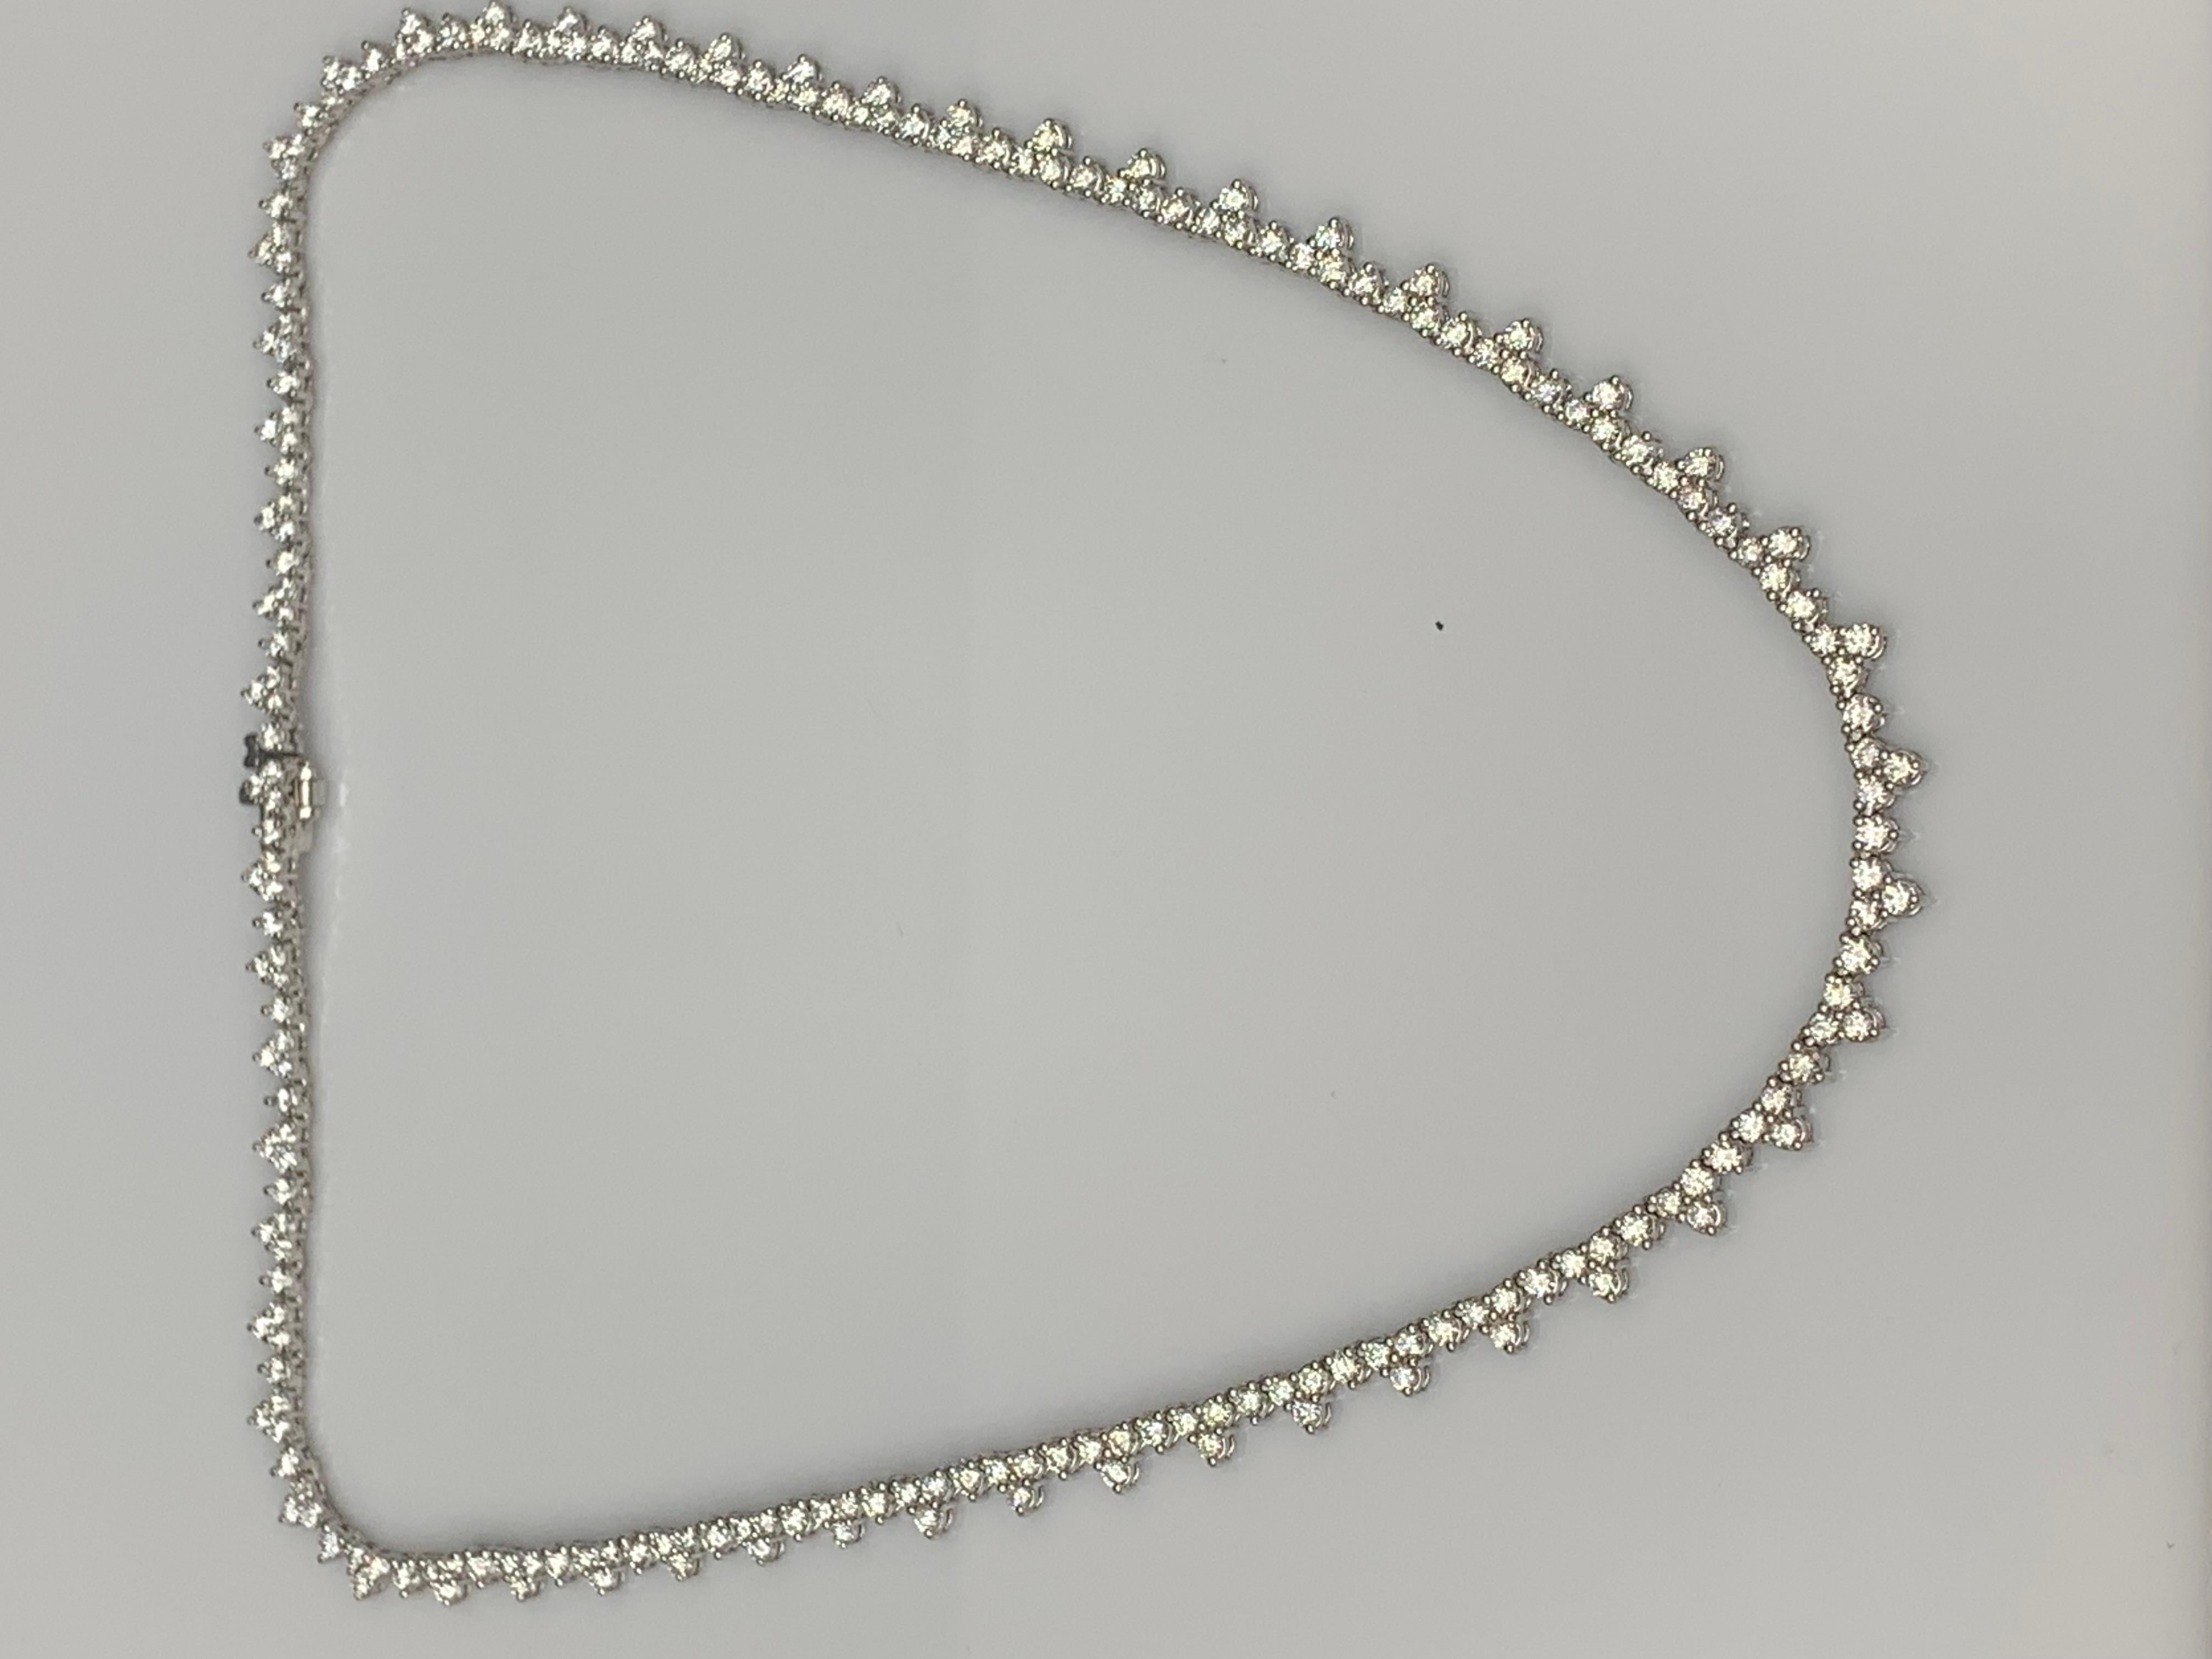 8.46 Carat Diamond Necklace in 14K White Gold For Sale 4